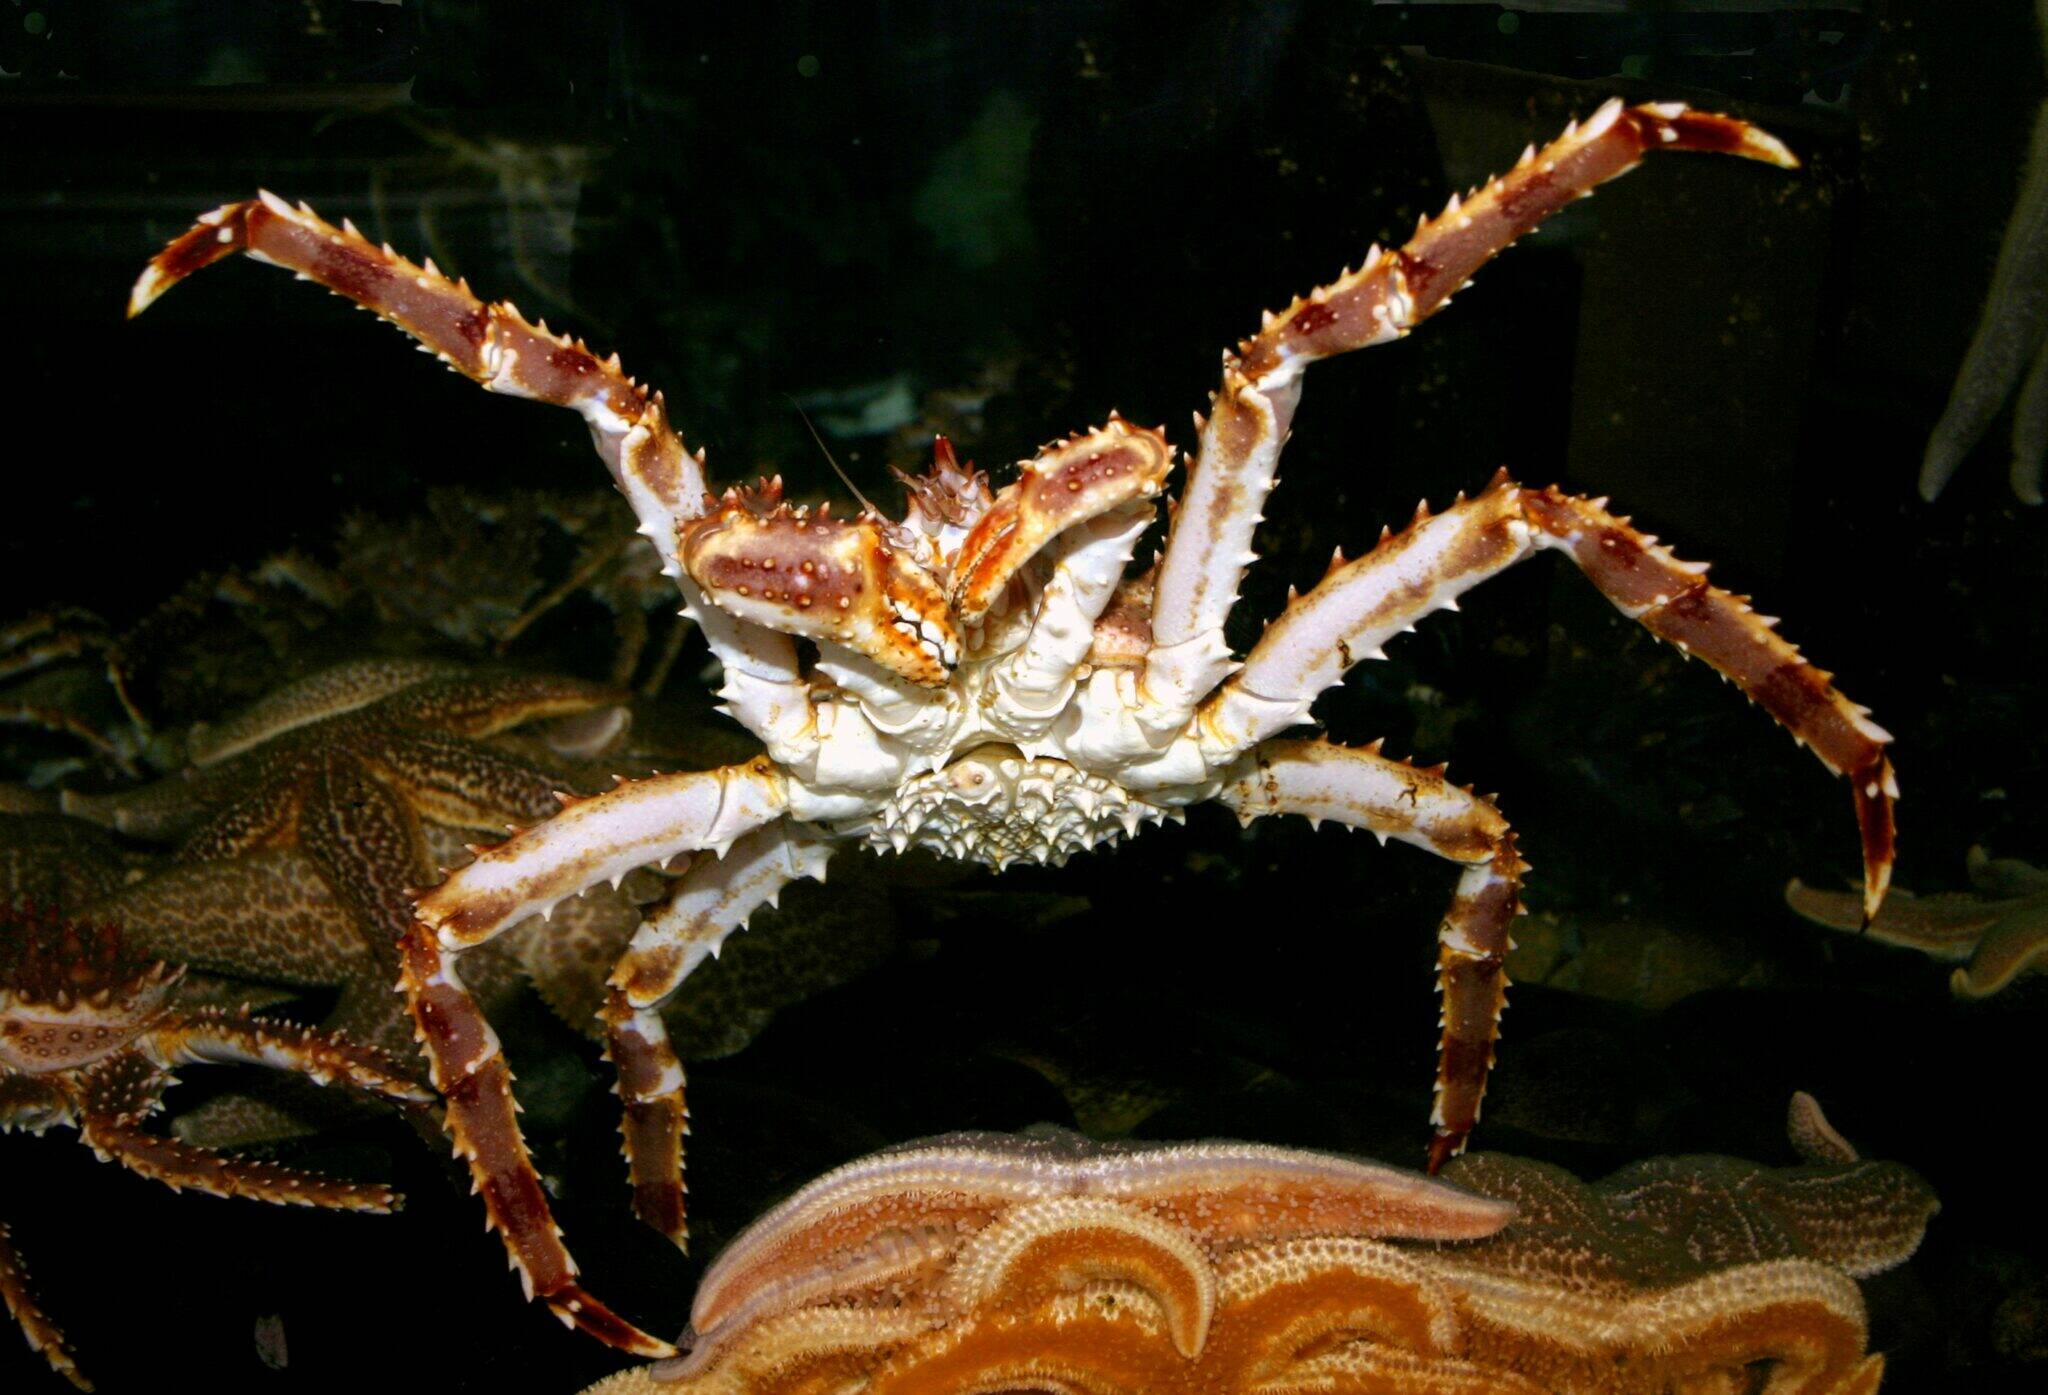 A red king crab is seen in the water at Kodiak in 2005. Surveys this year indicated that stocks in the Bering Sea are strong enough to allow a small Bristol Bay red king crab fishery after two years of closures. (Photo by David Csepp/National Oceanic and Atmospheric Administration)